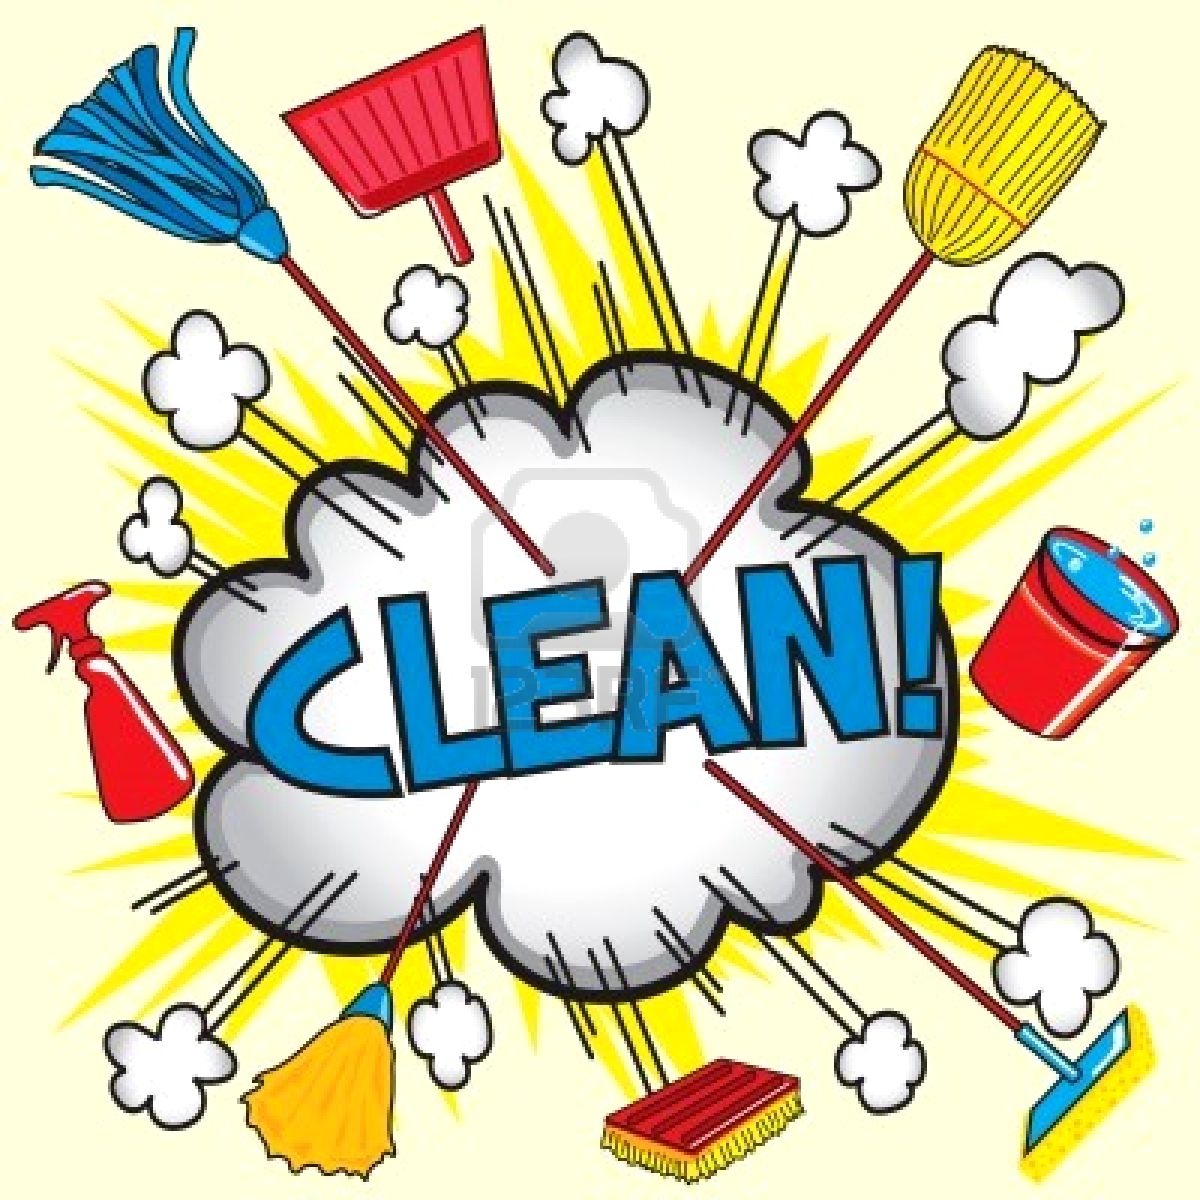 Cleaning Clip Art - Clipart l